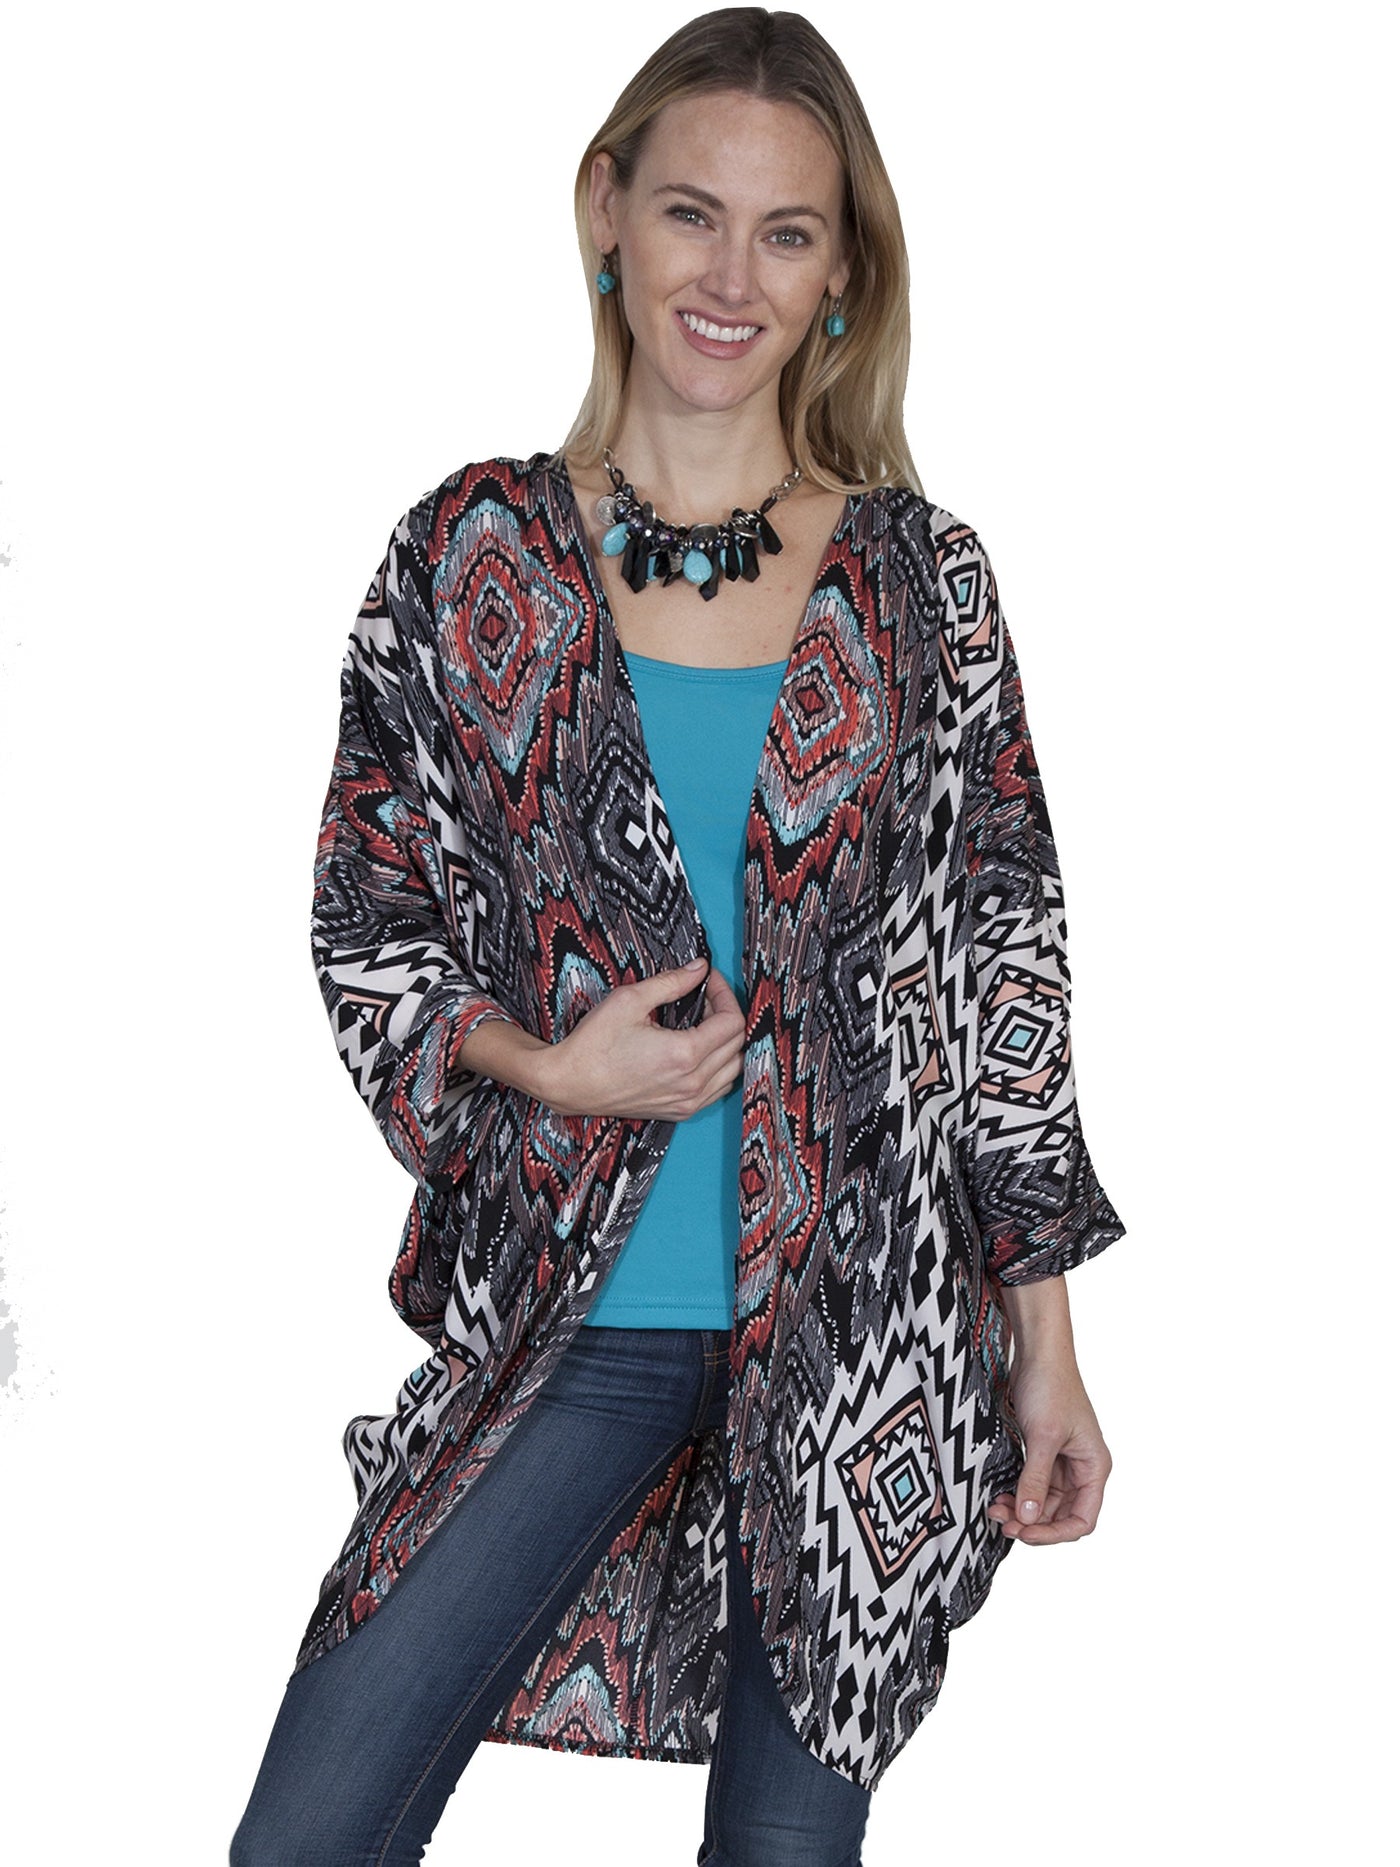 Prairie Lighweight Cover-Up in Multi - SOLD OUT